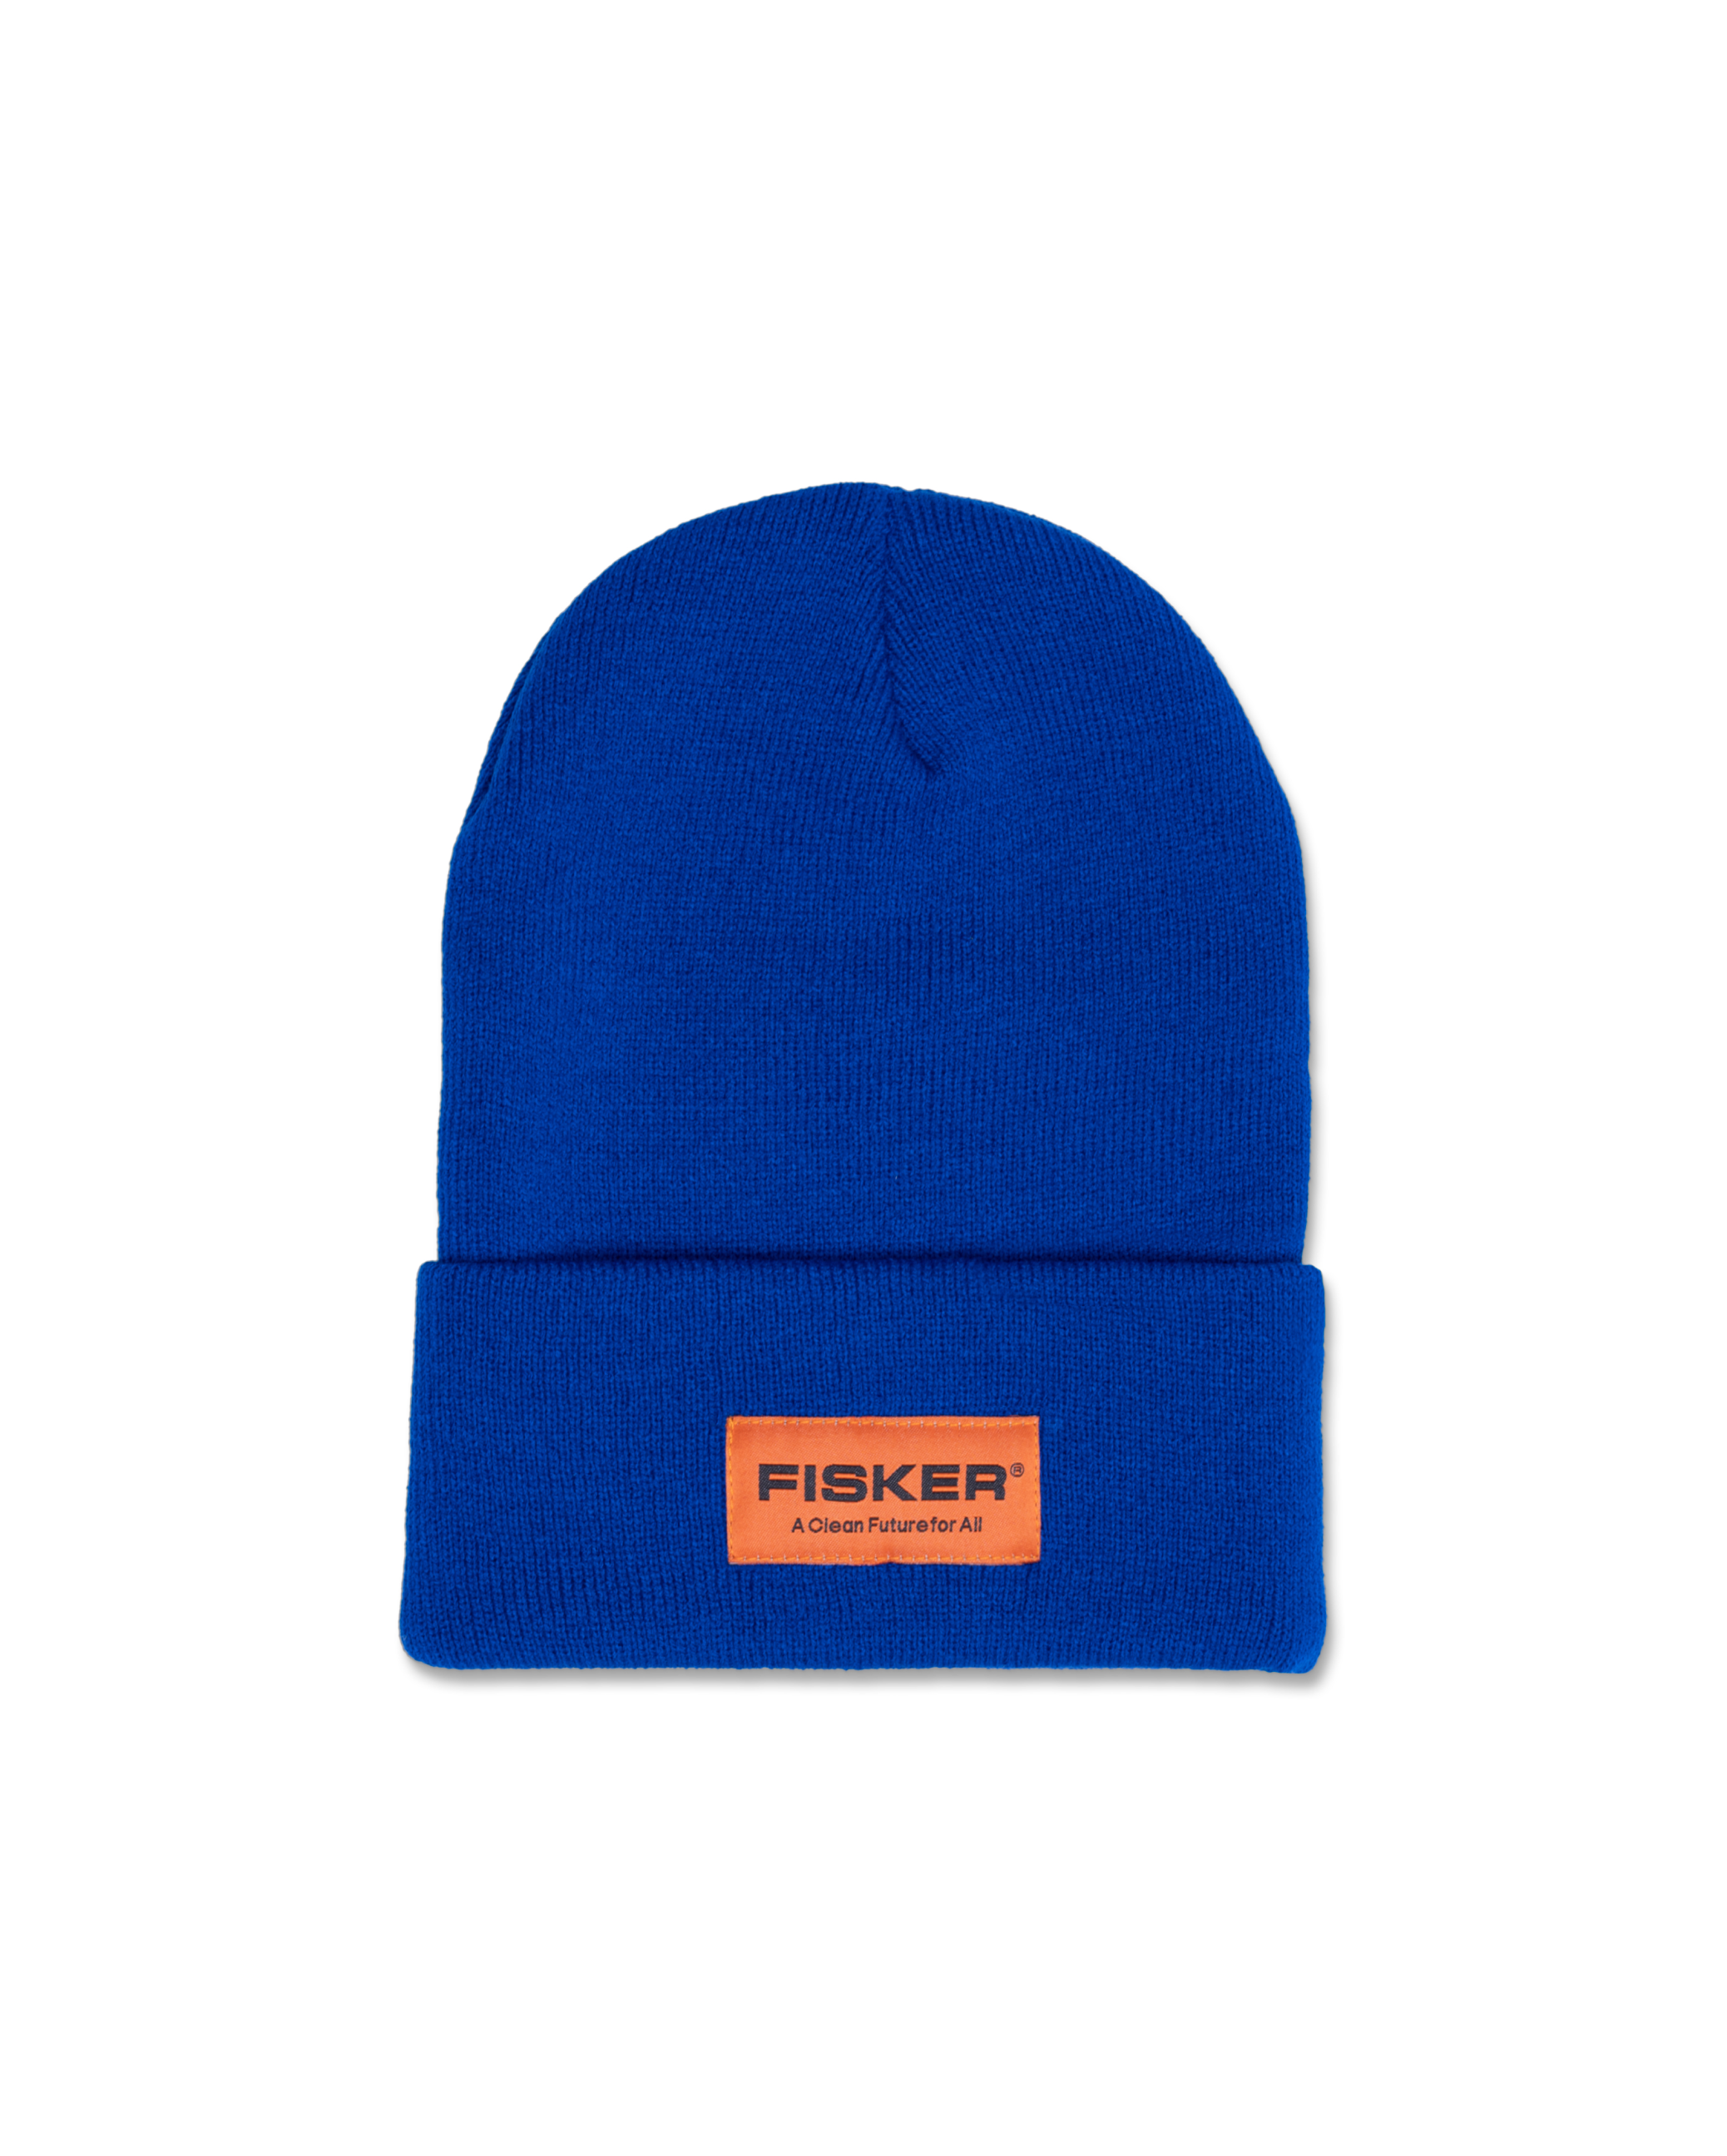 Fisker Bright Blue Beanie, , large image number 0